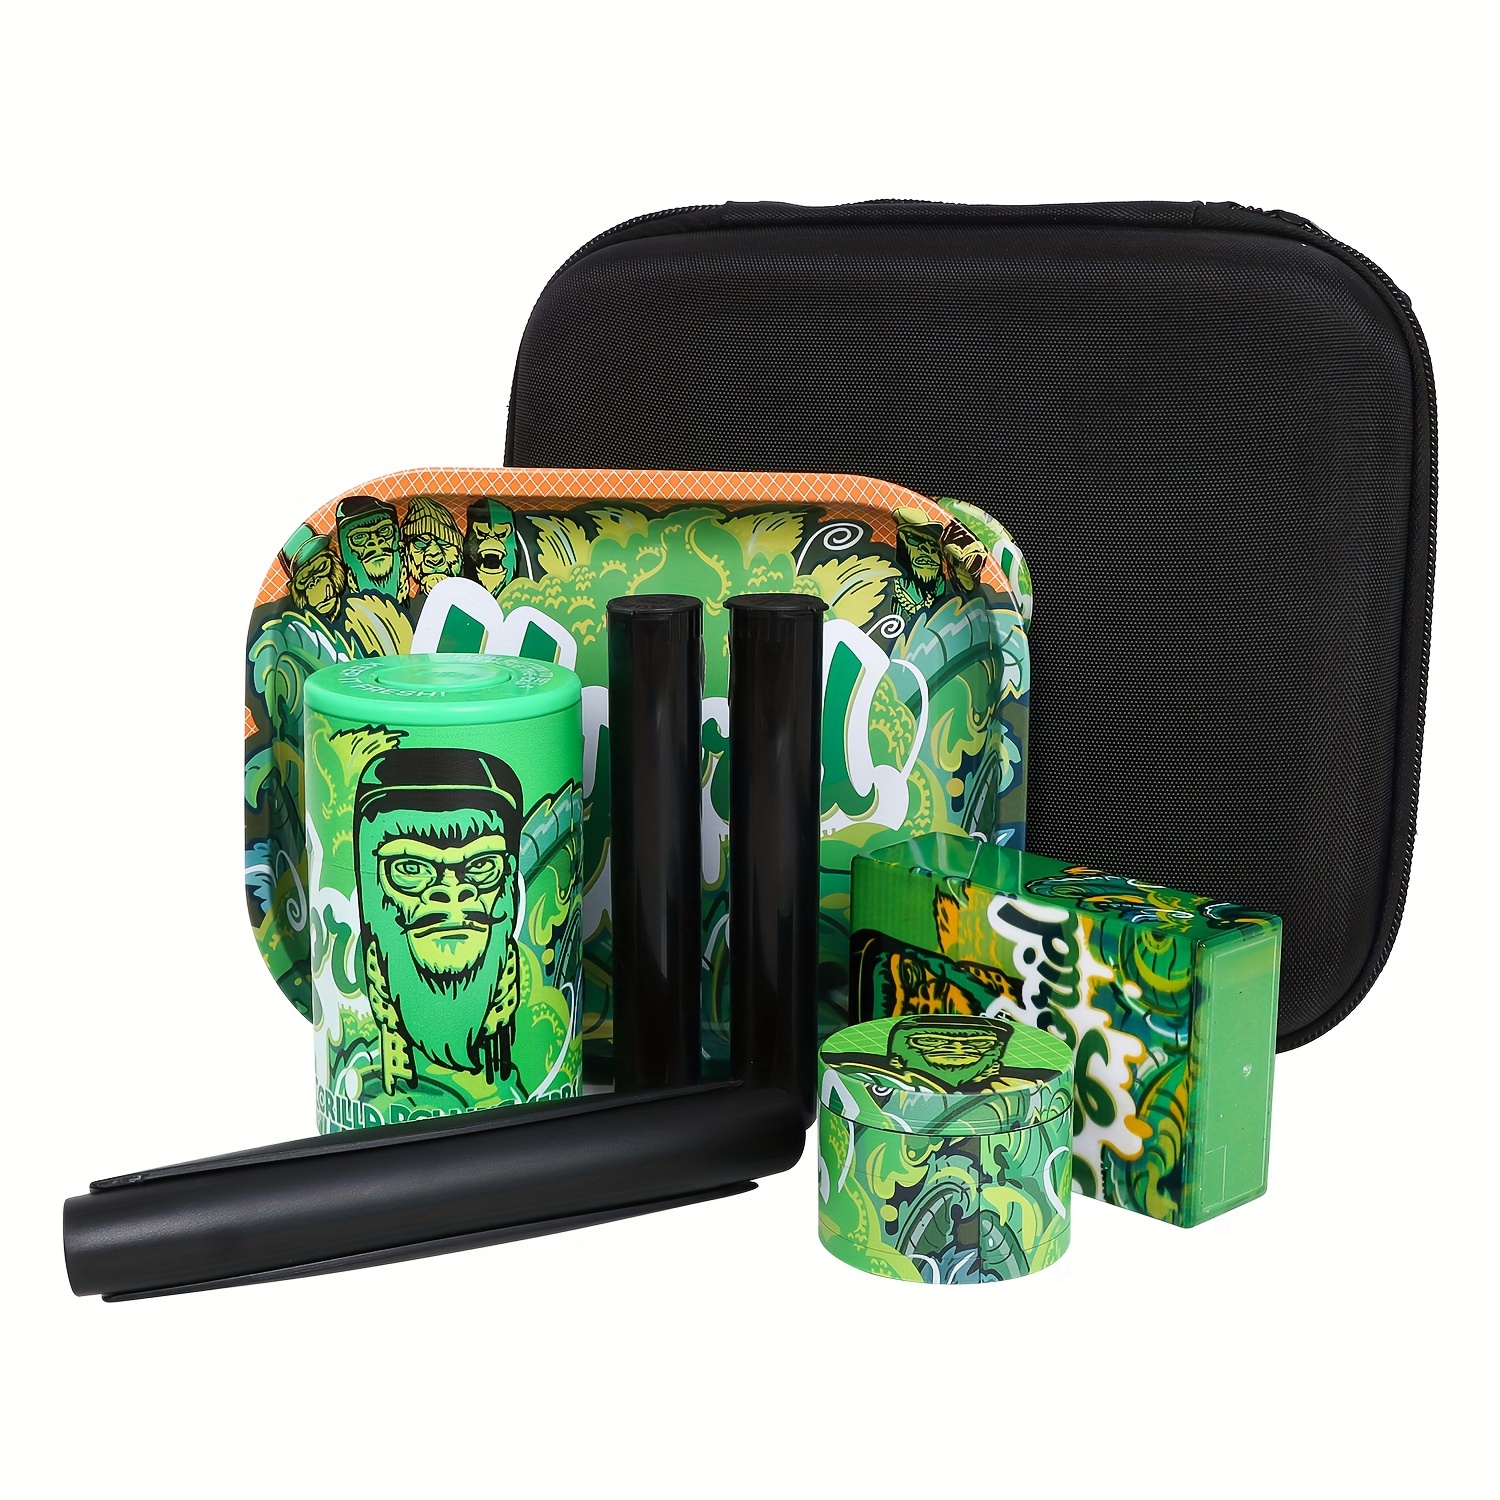 Smoking Pipes Accessories Rolling Tray Set Case Cigarette Herb Grinder And  Bag Dry Tobacco Jar Storage Drop From 12,63 €